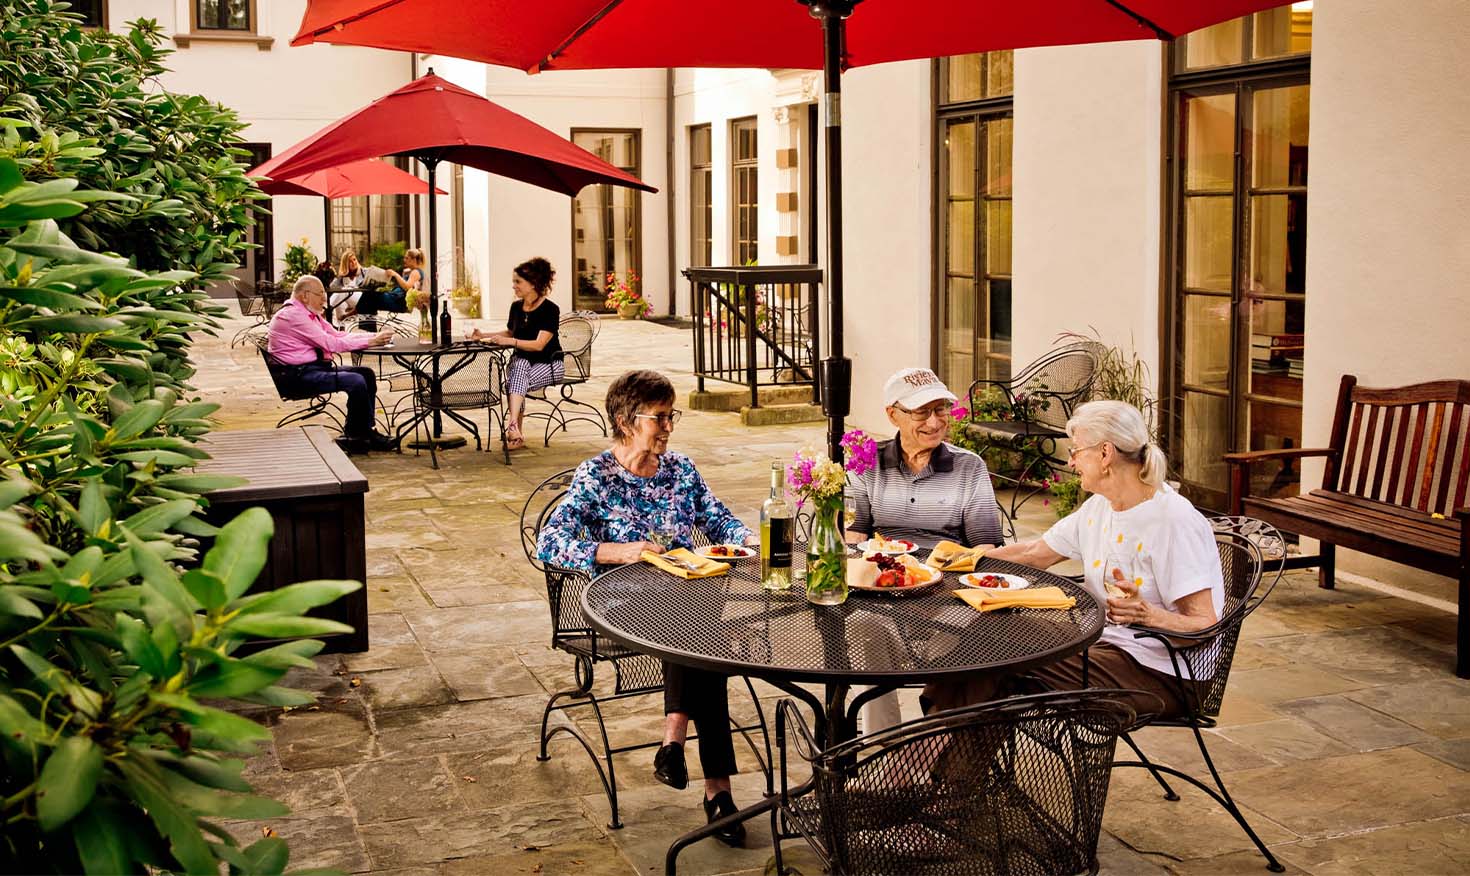 Seniors eating lunch outside on a patio